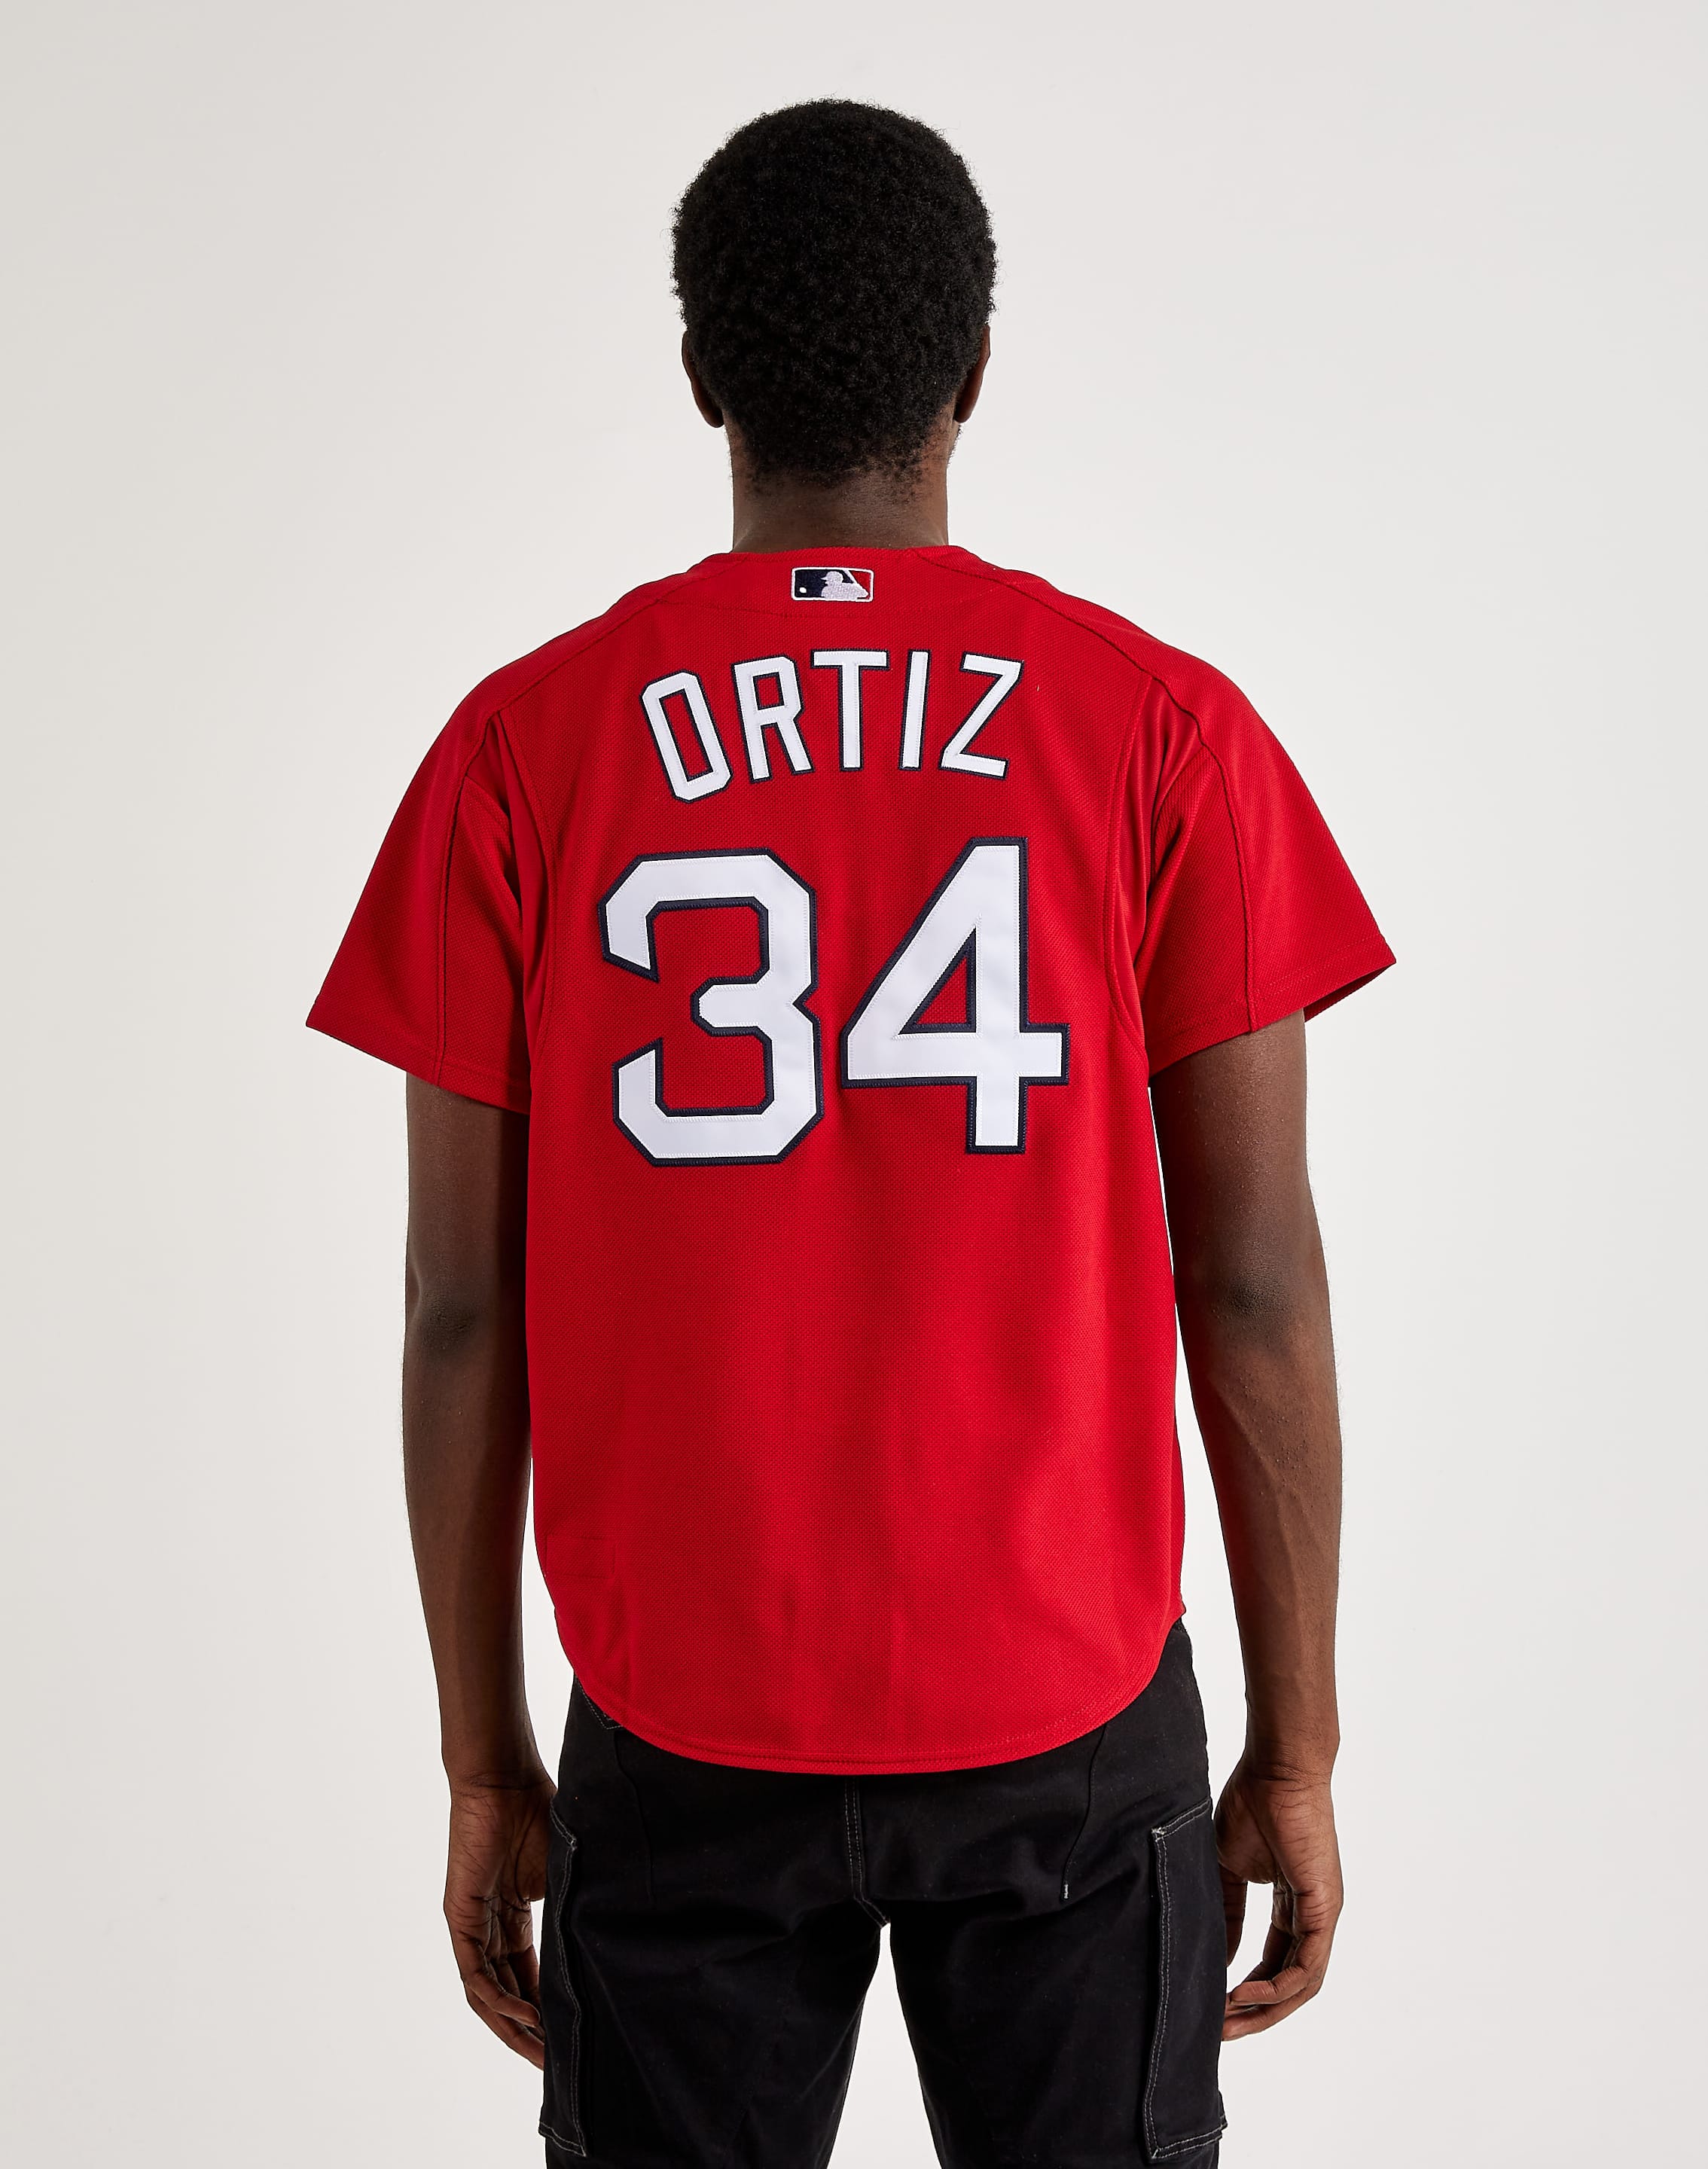 Mitchell & Ness Authentic David Ortiz Boston Red Sox 2004 Jersey – DTLR